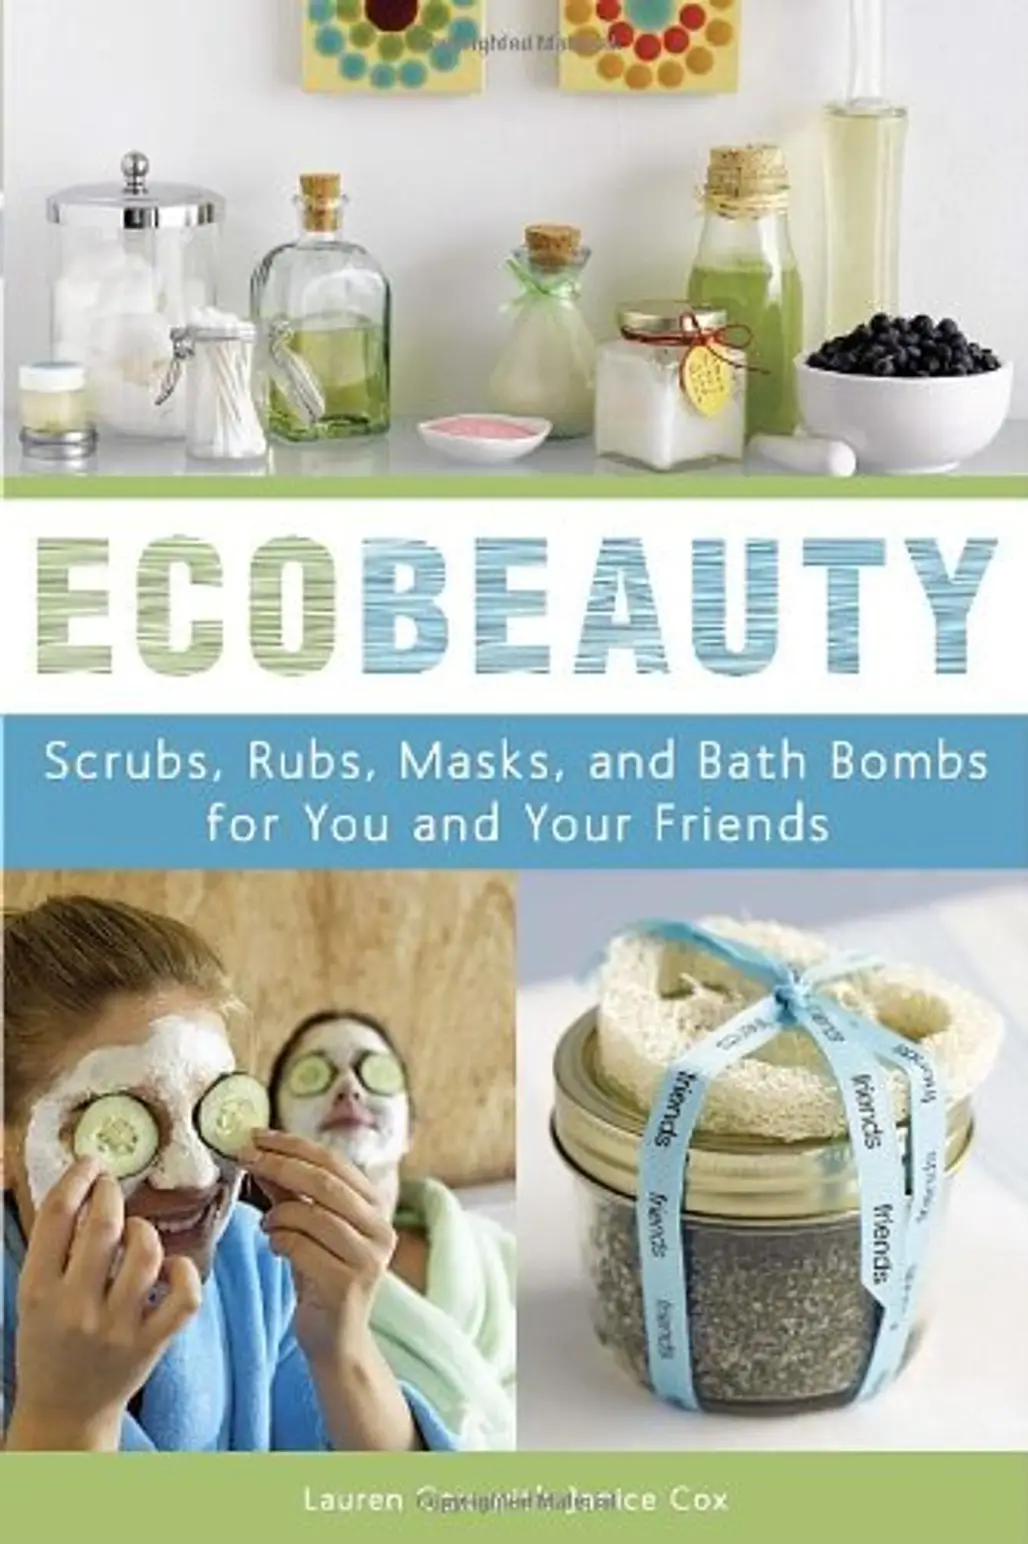 EcoBeauty: Scrubs, Rubs, Masks and Bath Bombs for You and Your Friends